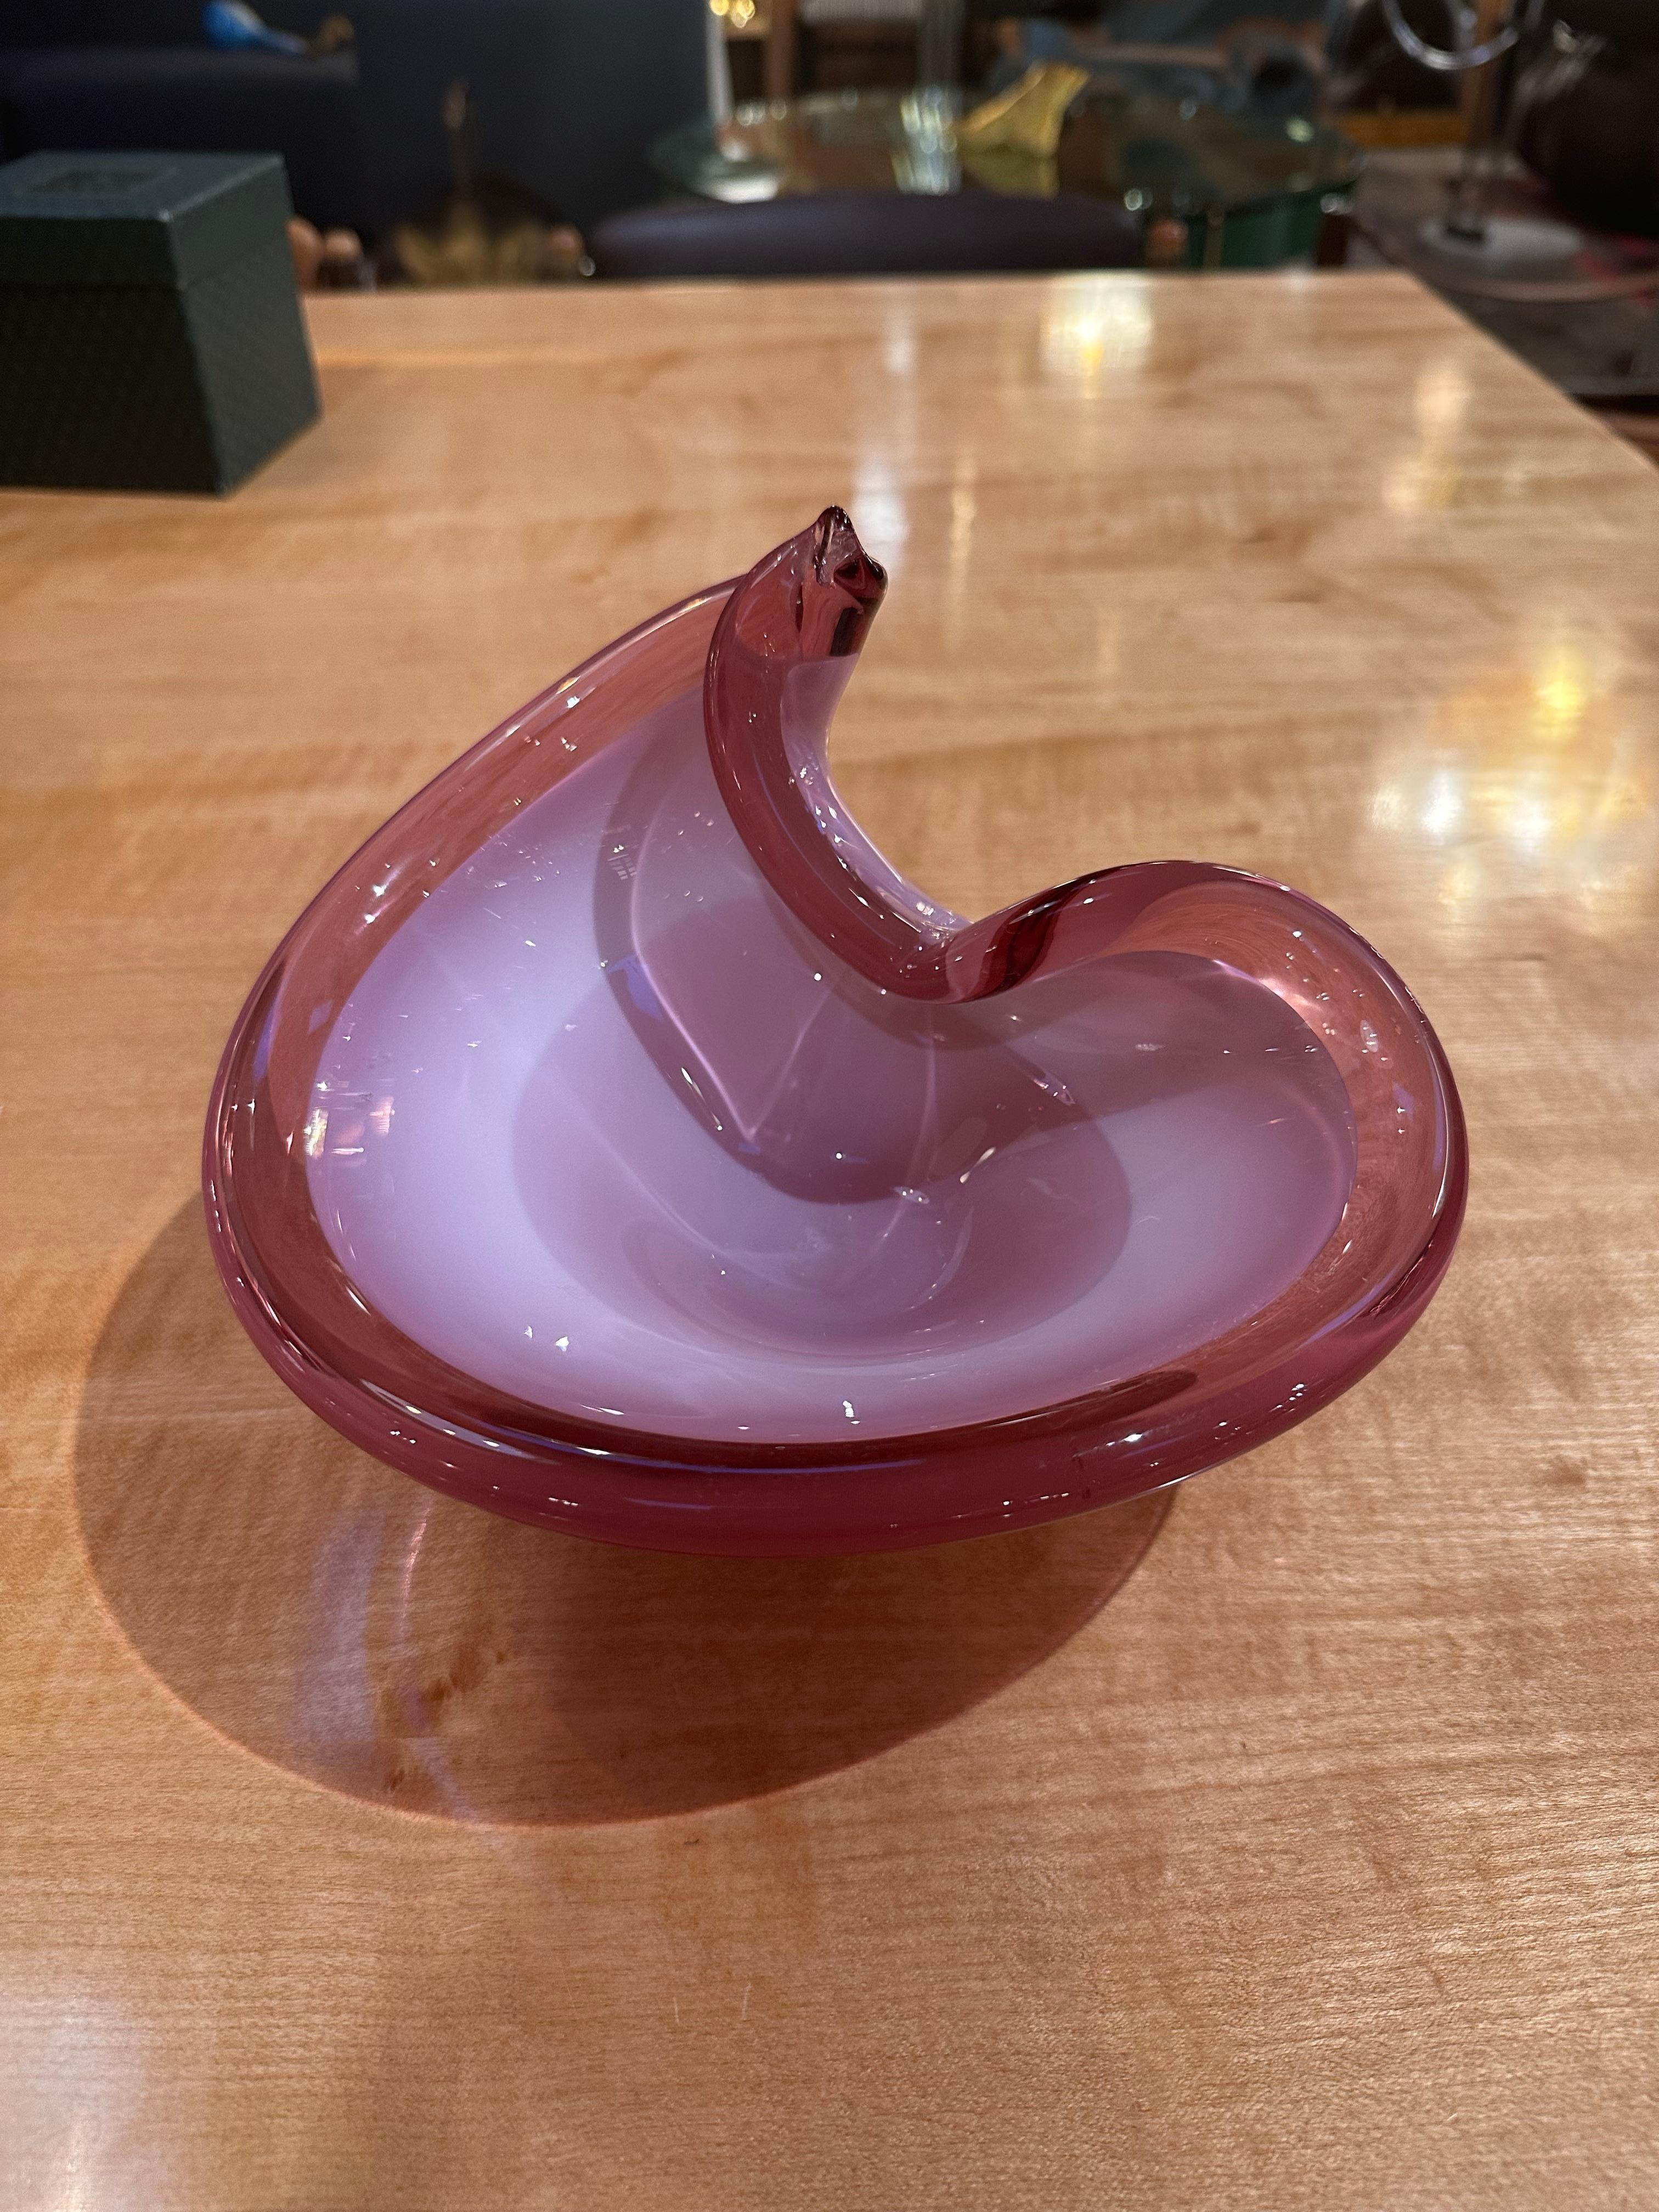 The Vintage Italian Decorative Pink Bowl from the 1980s is a charming and stylish piece of tabletop decor. Crafted with a nod to the design sensibilities of the era, the bowl features a pleasing pink hue, adding a touch of retro elegance. Its